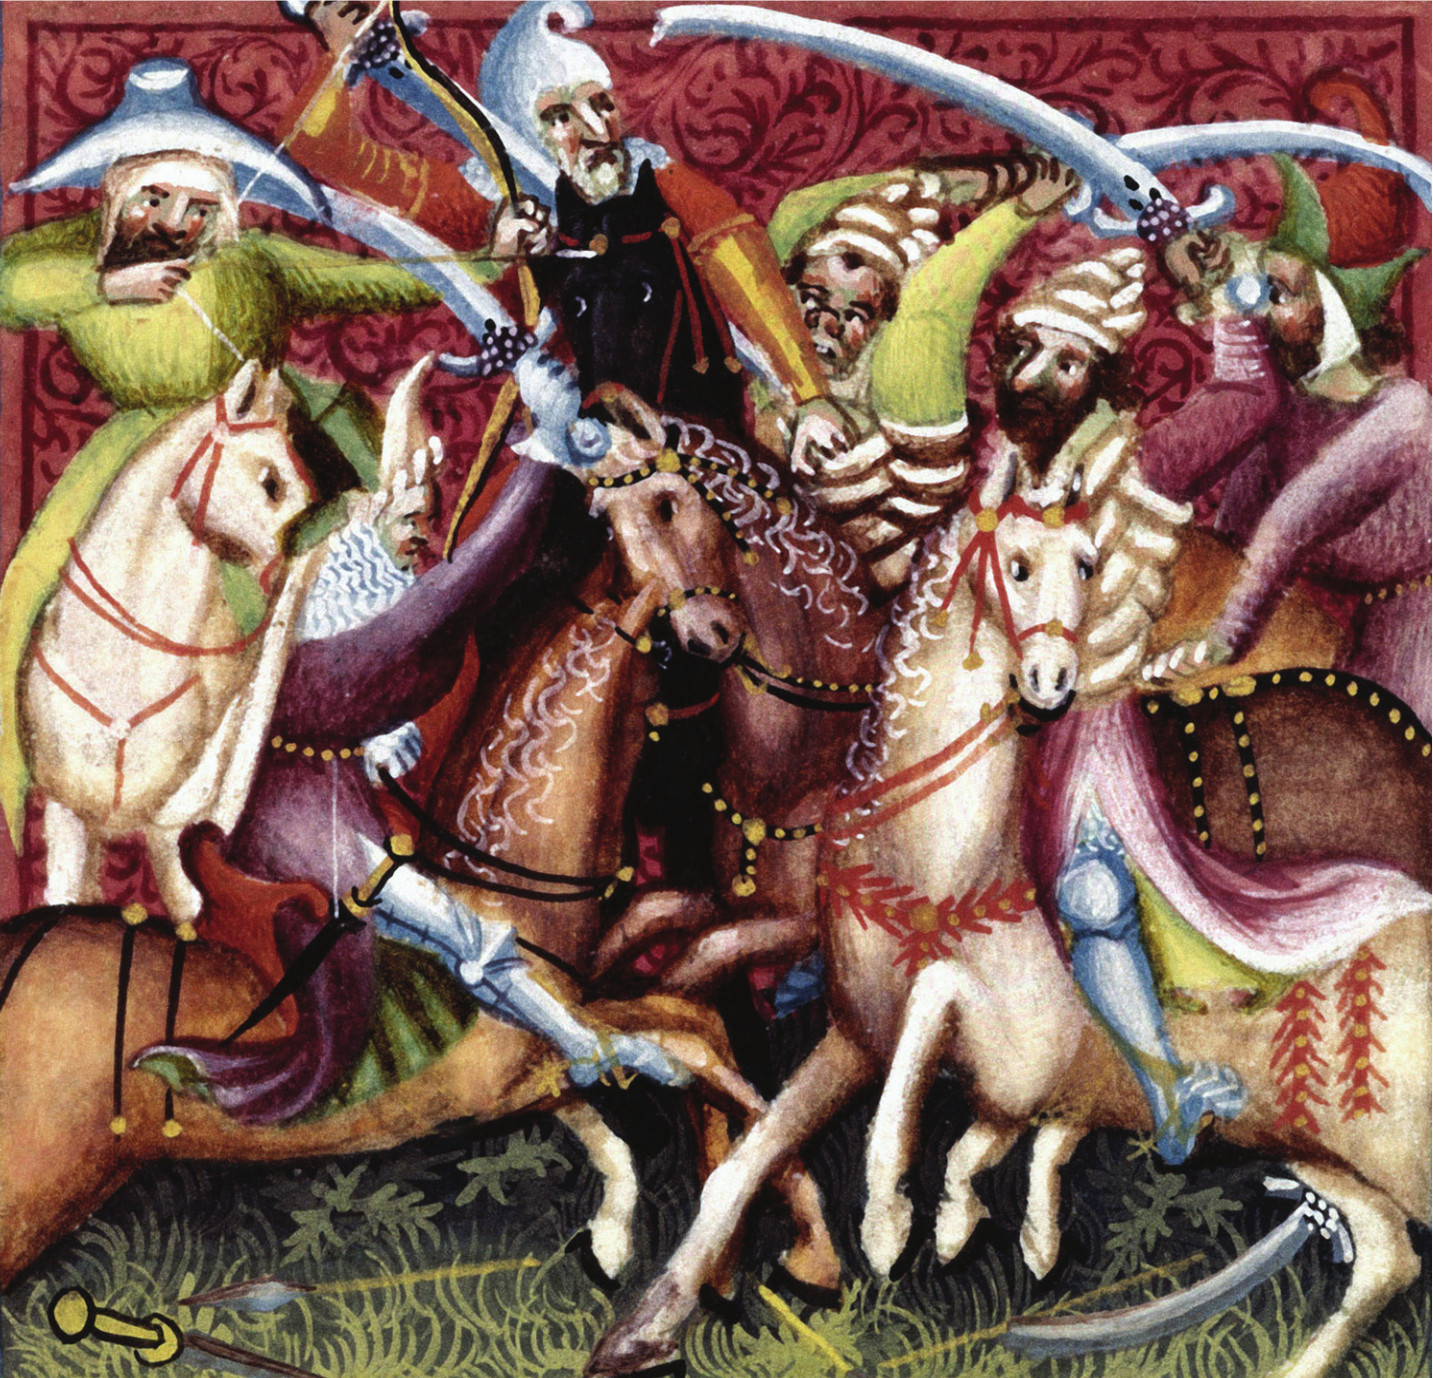 Mounted Christians and Muslims collide in combat during the climax of the Battle of Tours in this 15th-century manuscript illumination.